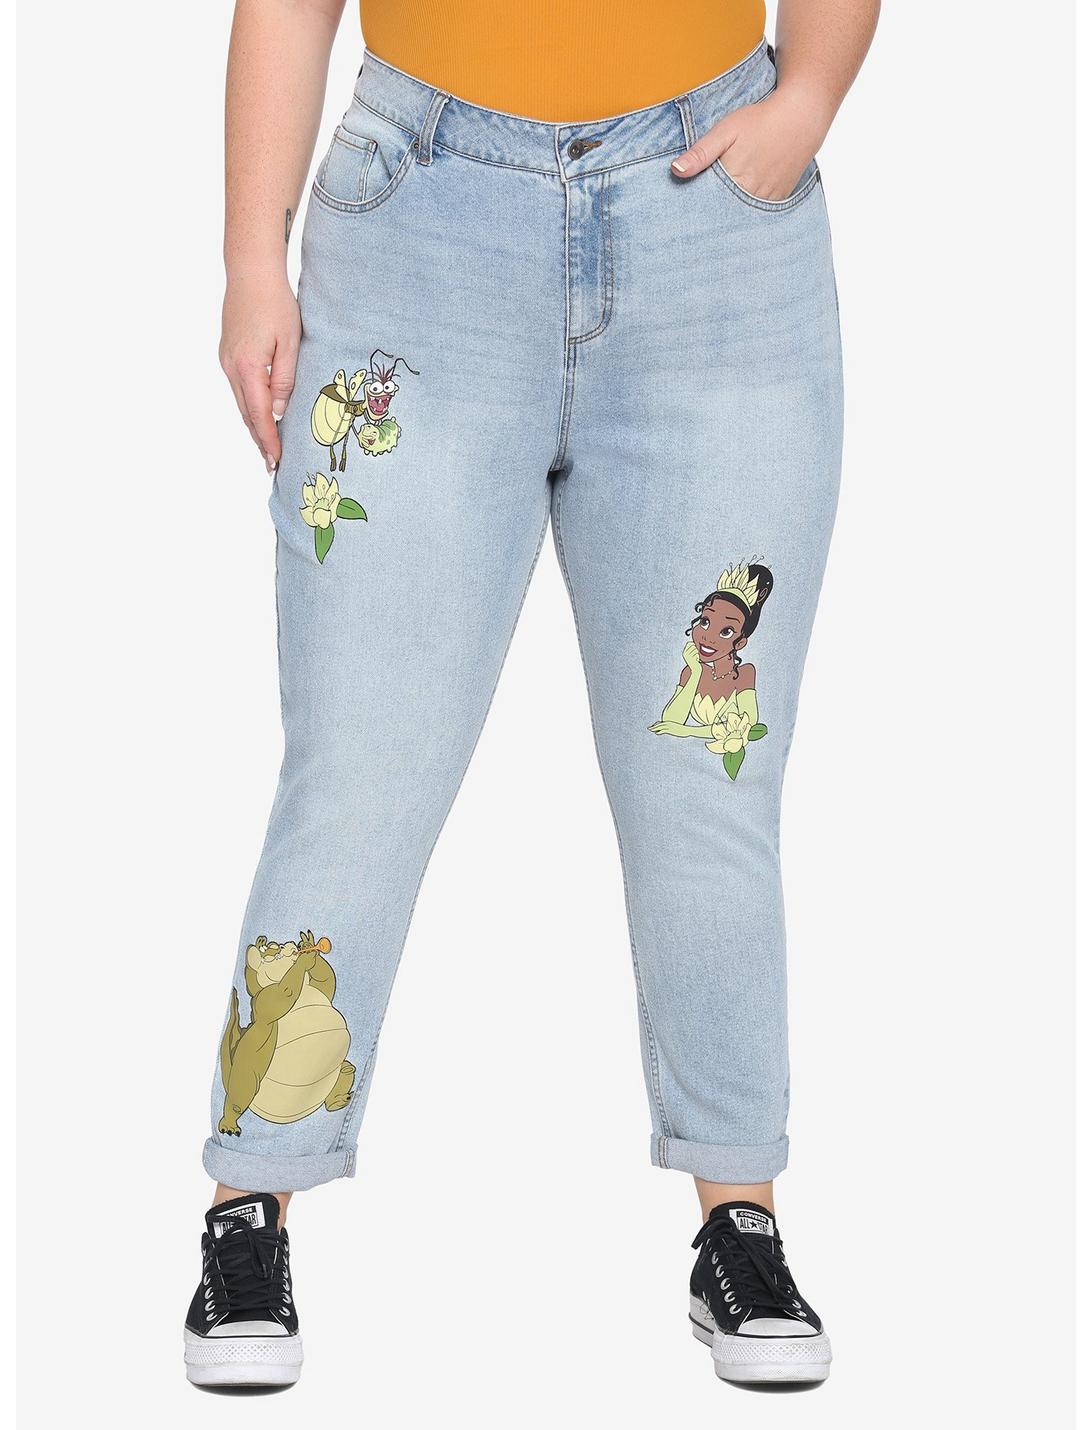 Disney The Princess And The Frog Tiana Mom Jeans Plus Size, MULTI, hi-res